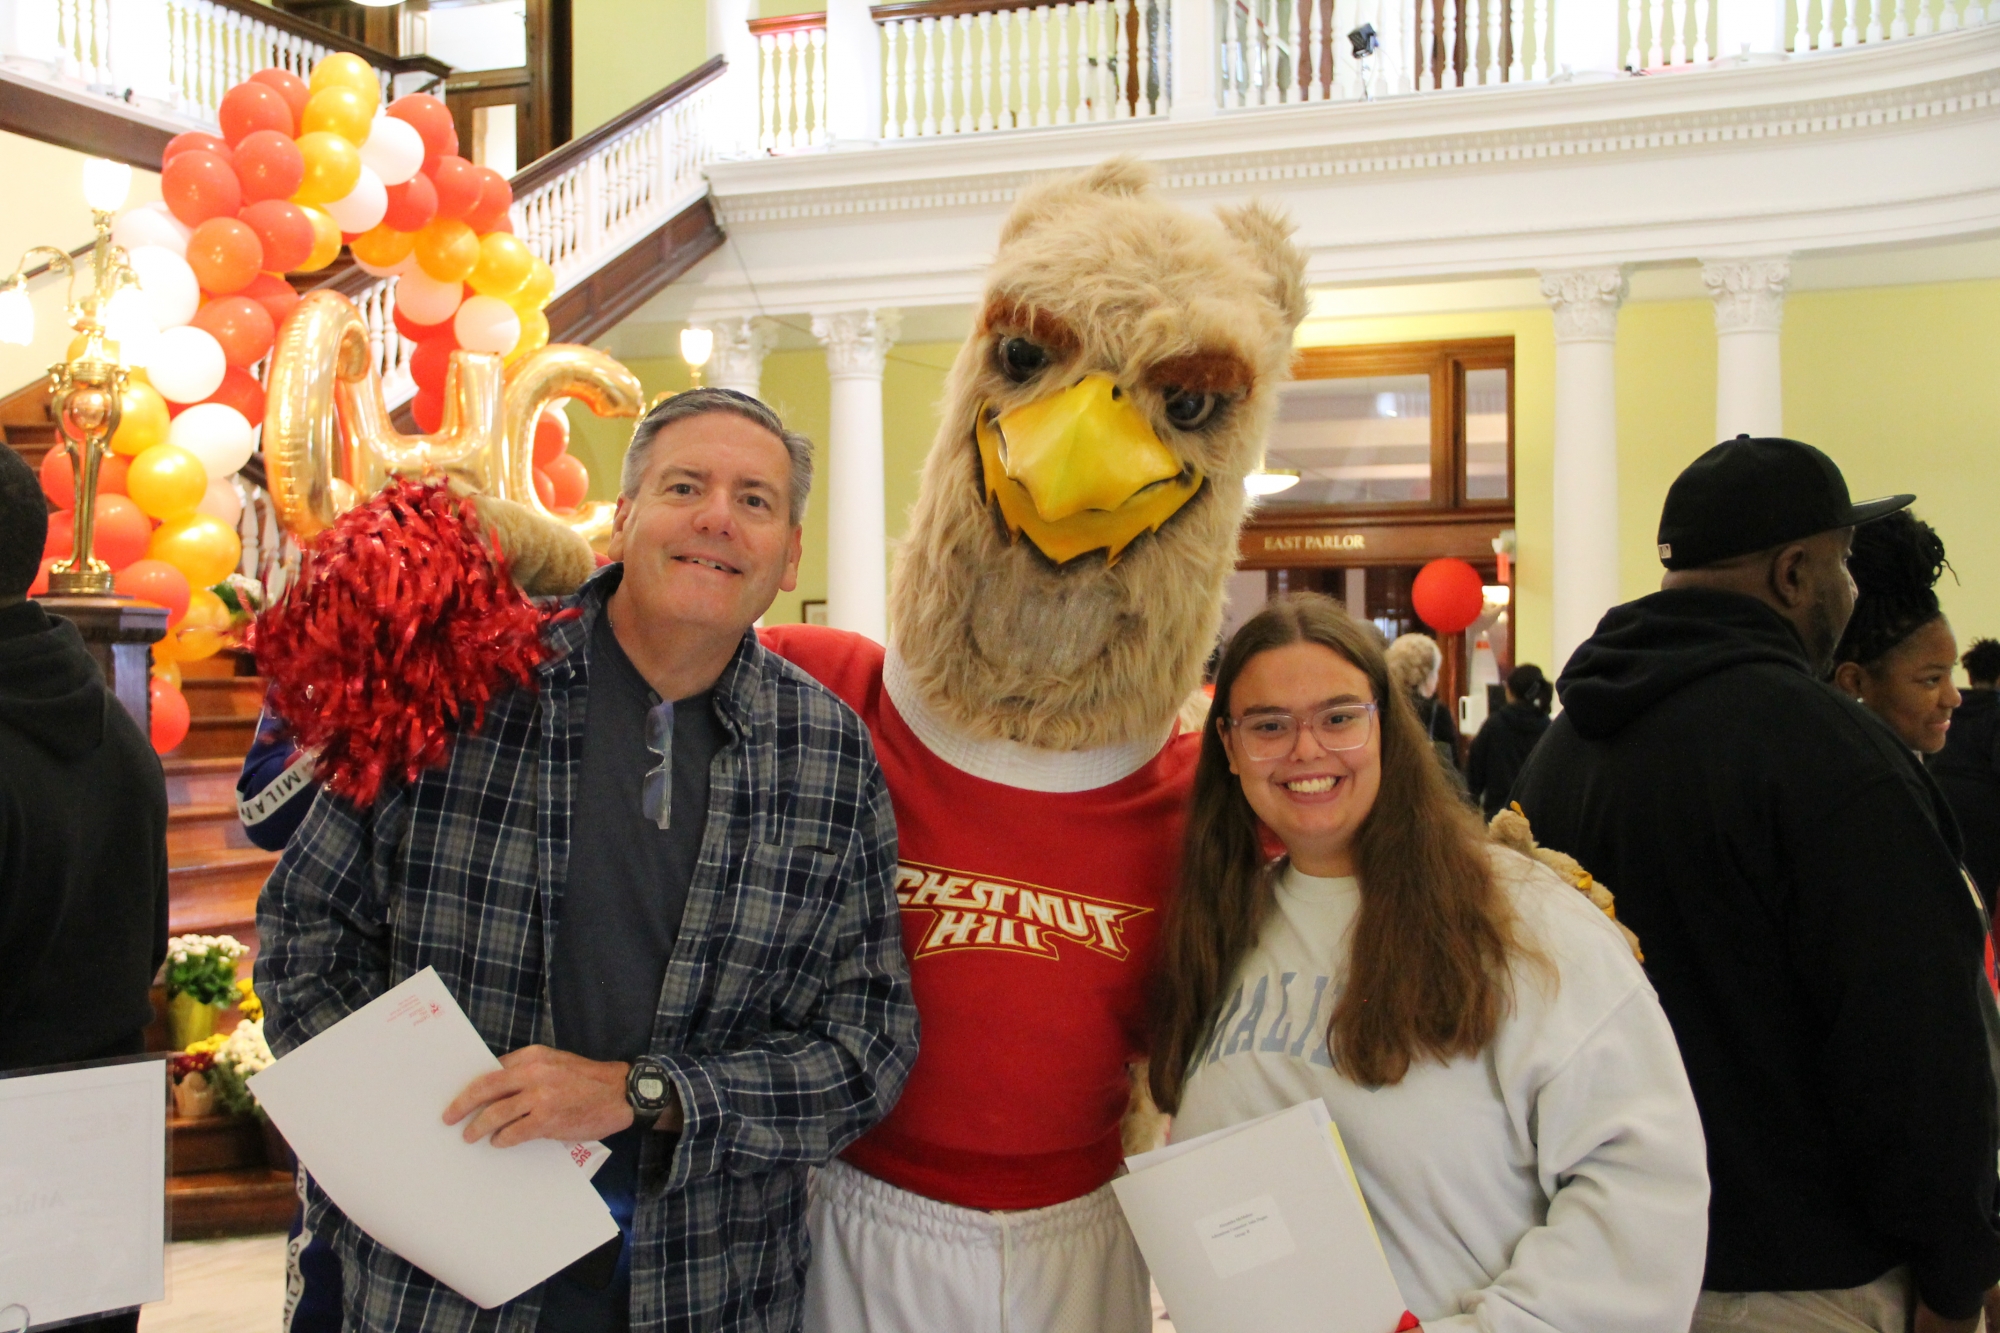 College mascot, Big Griff, was all smiles as he interacted with future Griffins!